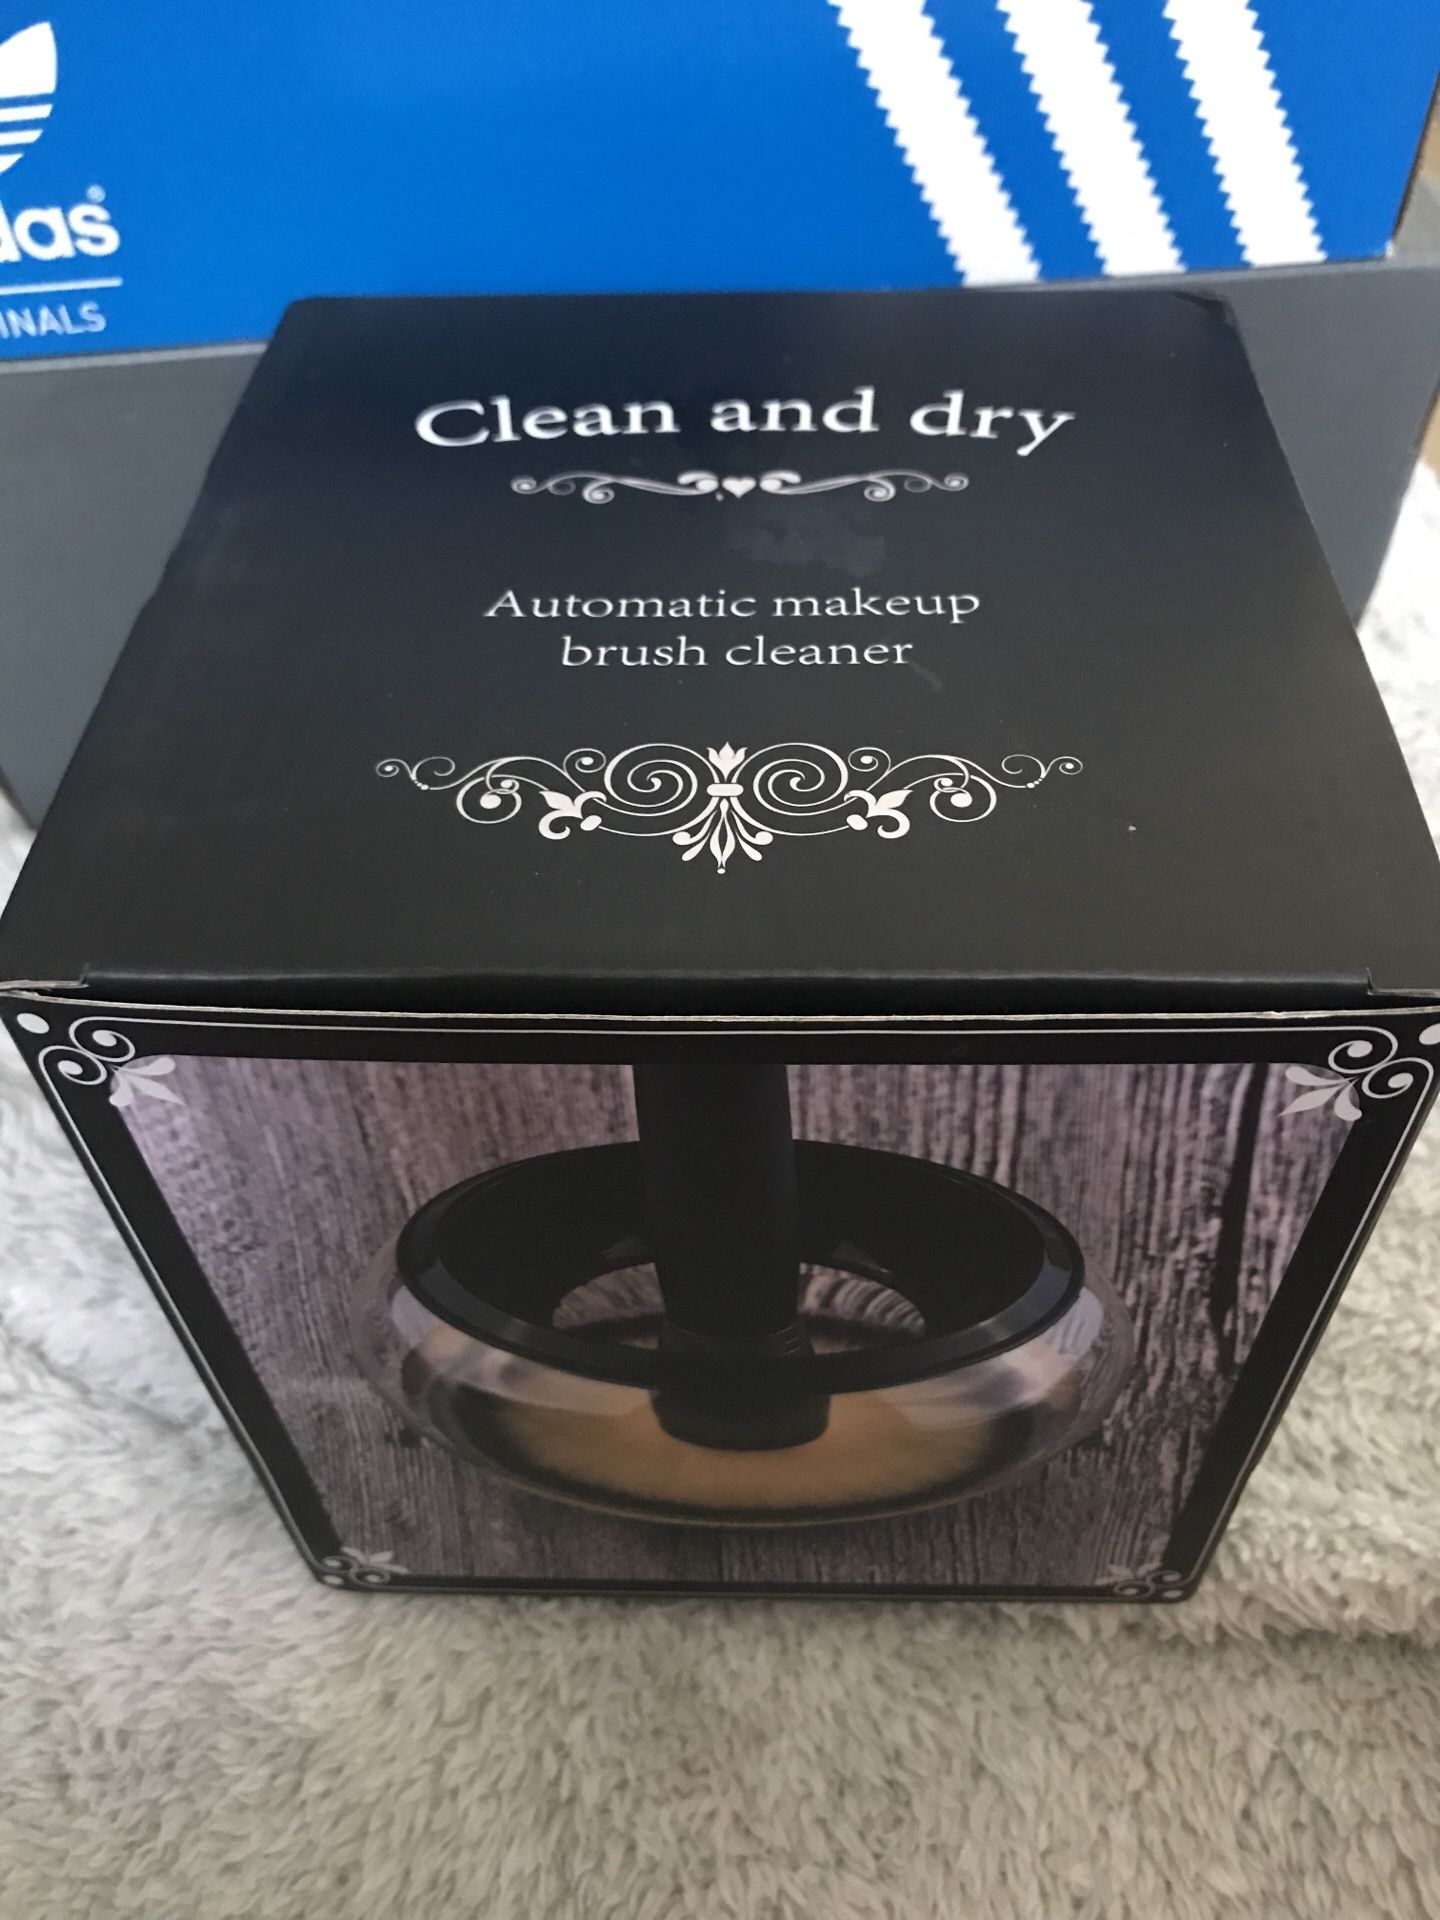 Clean and dry automatic makeup brush cleaner